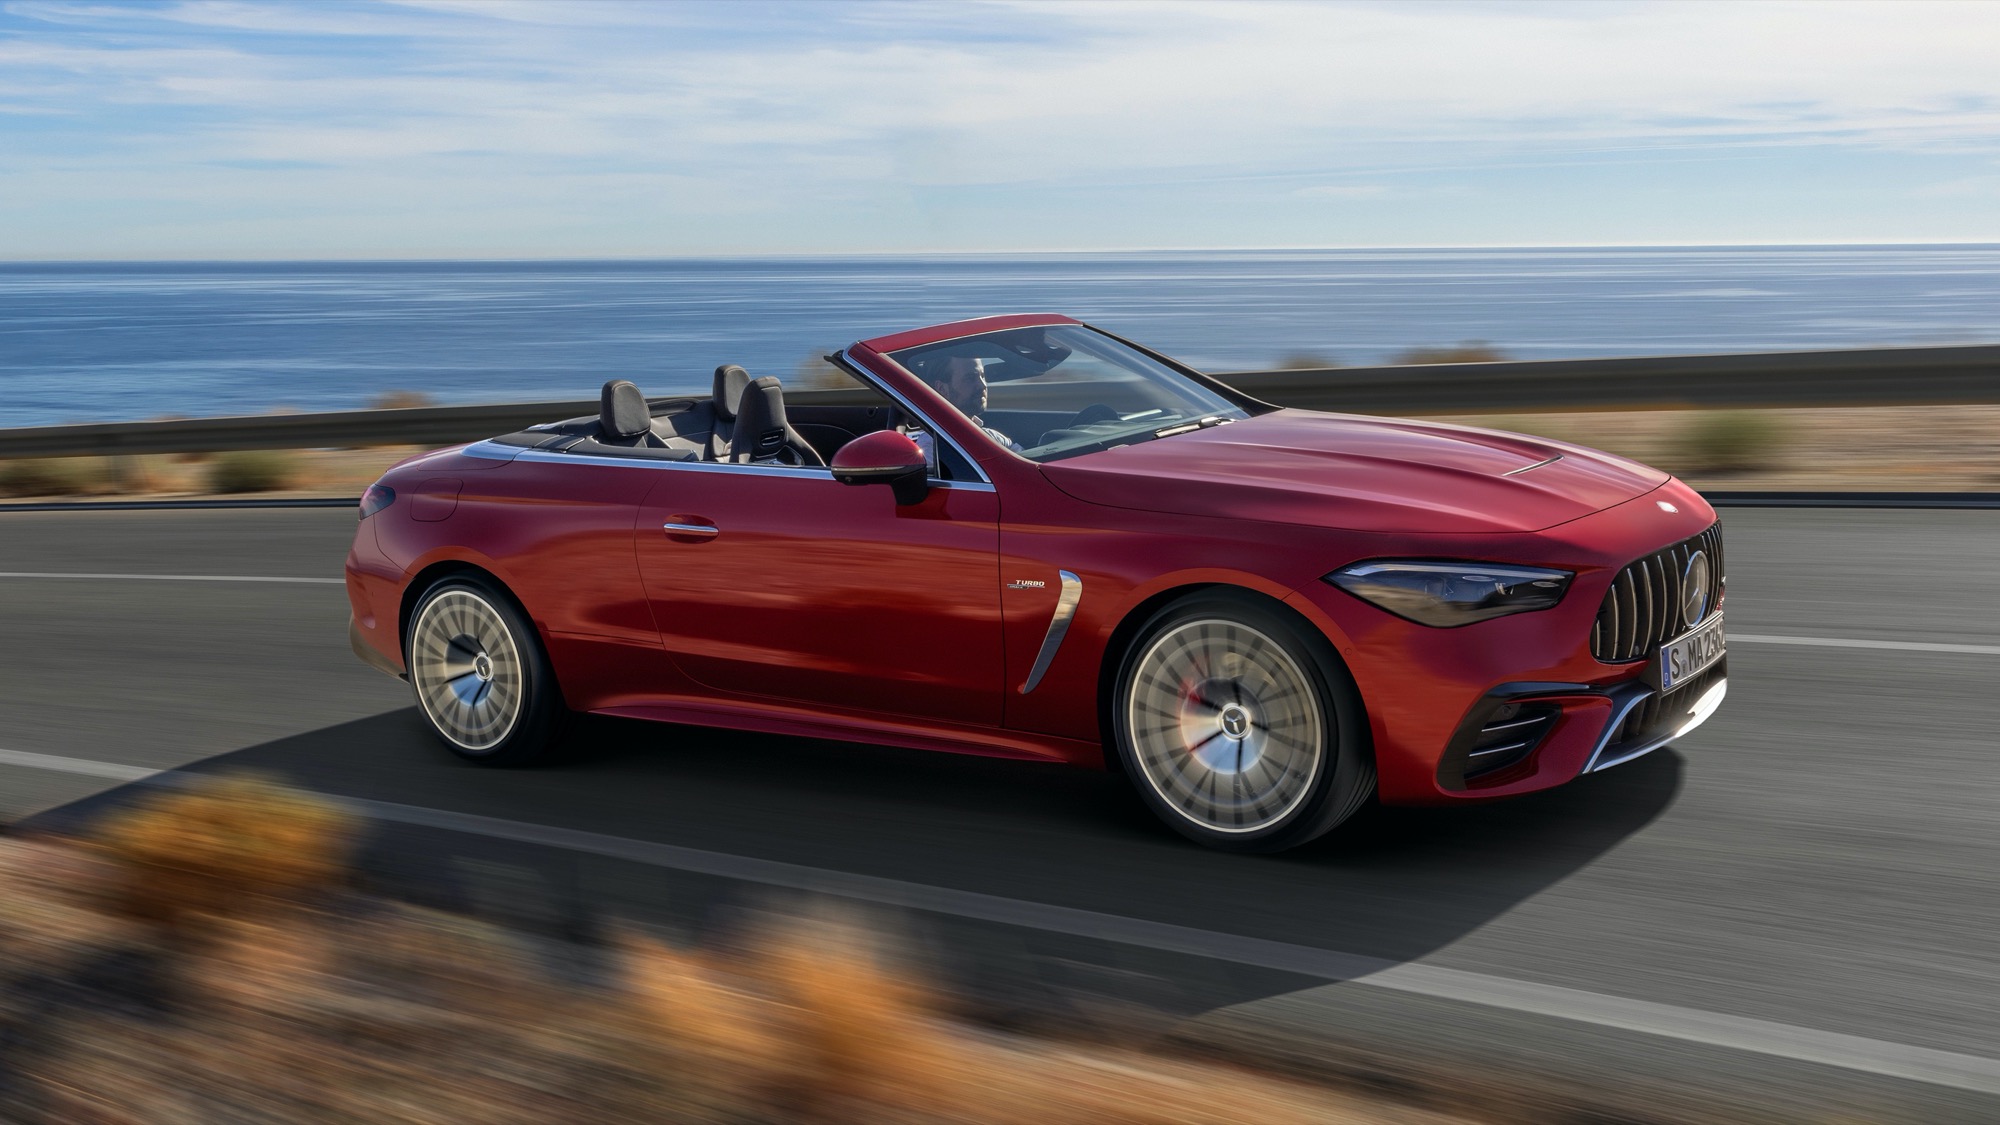 M-AMG CLE 53 Cabriolet 4Matic+登場，變身「上空」只要20秒！